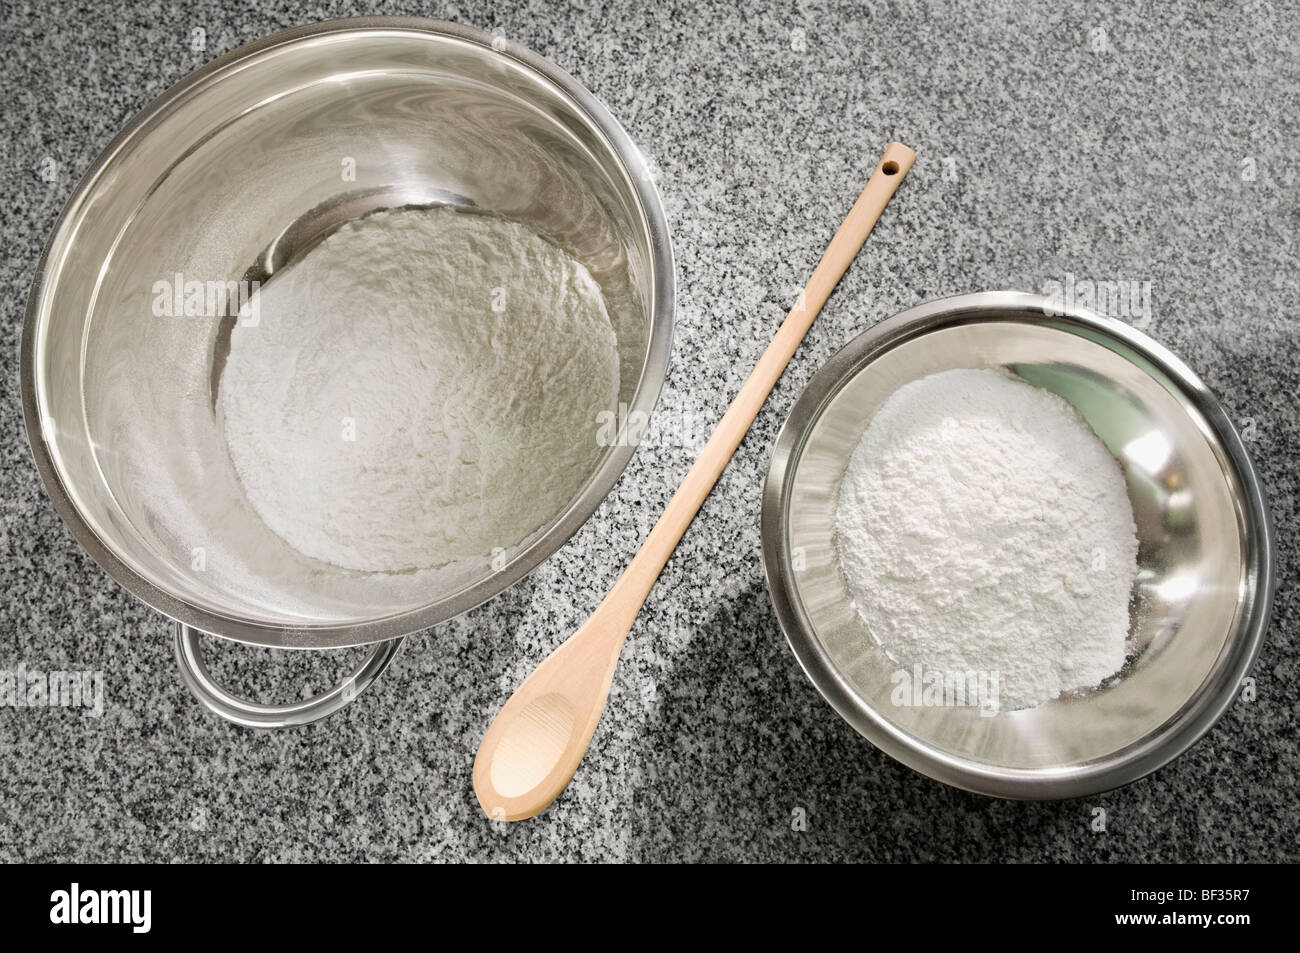 Close-up two bowls of flour with a wooden spoon Stock Photo